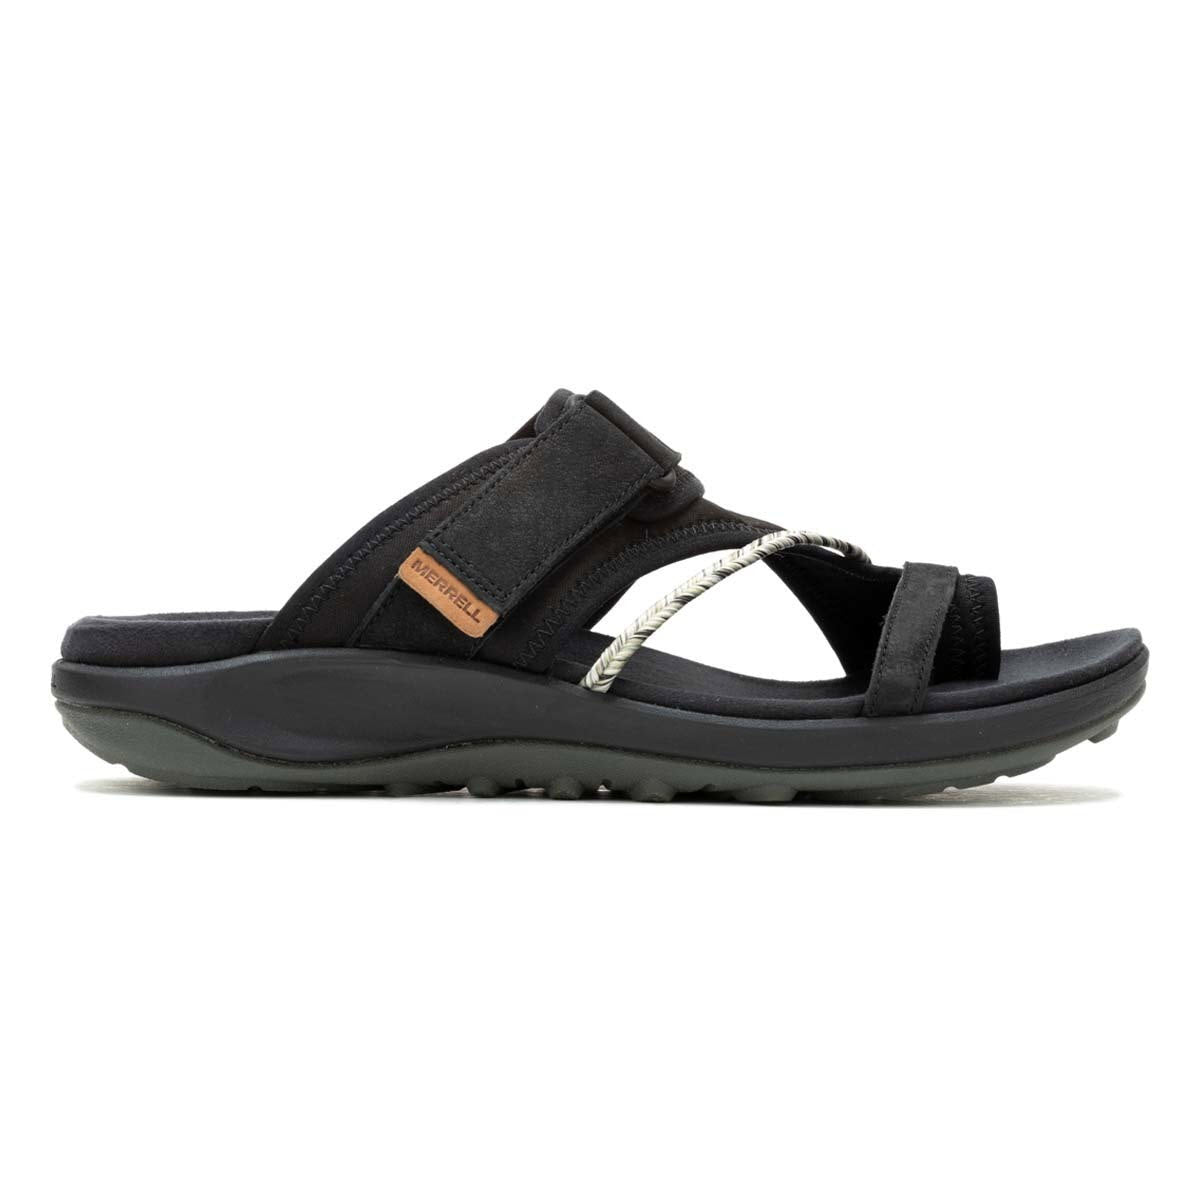 A single black Merrell Terran 4 post sports sandal with adjustable straps and a rugged sole, displayed against a white background.